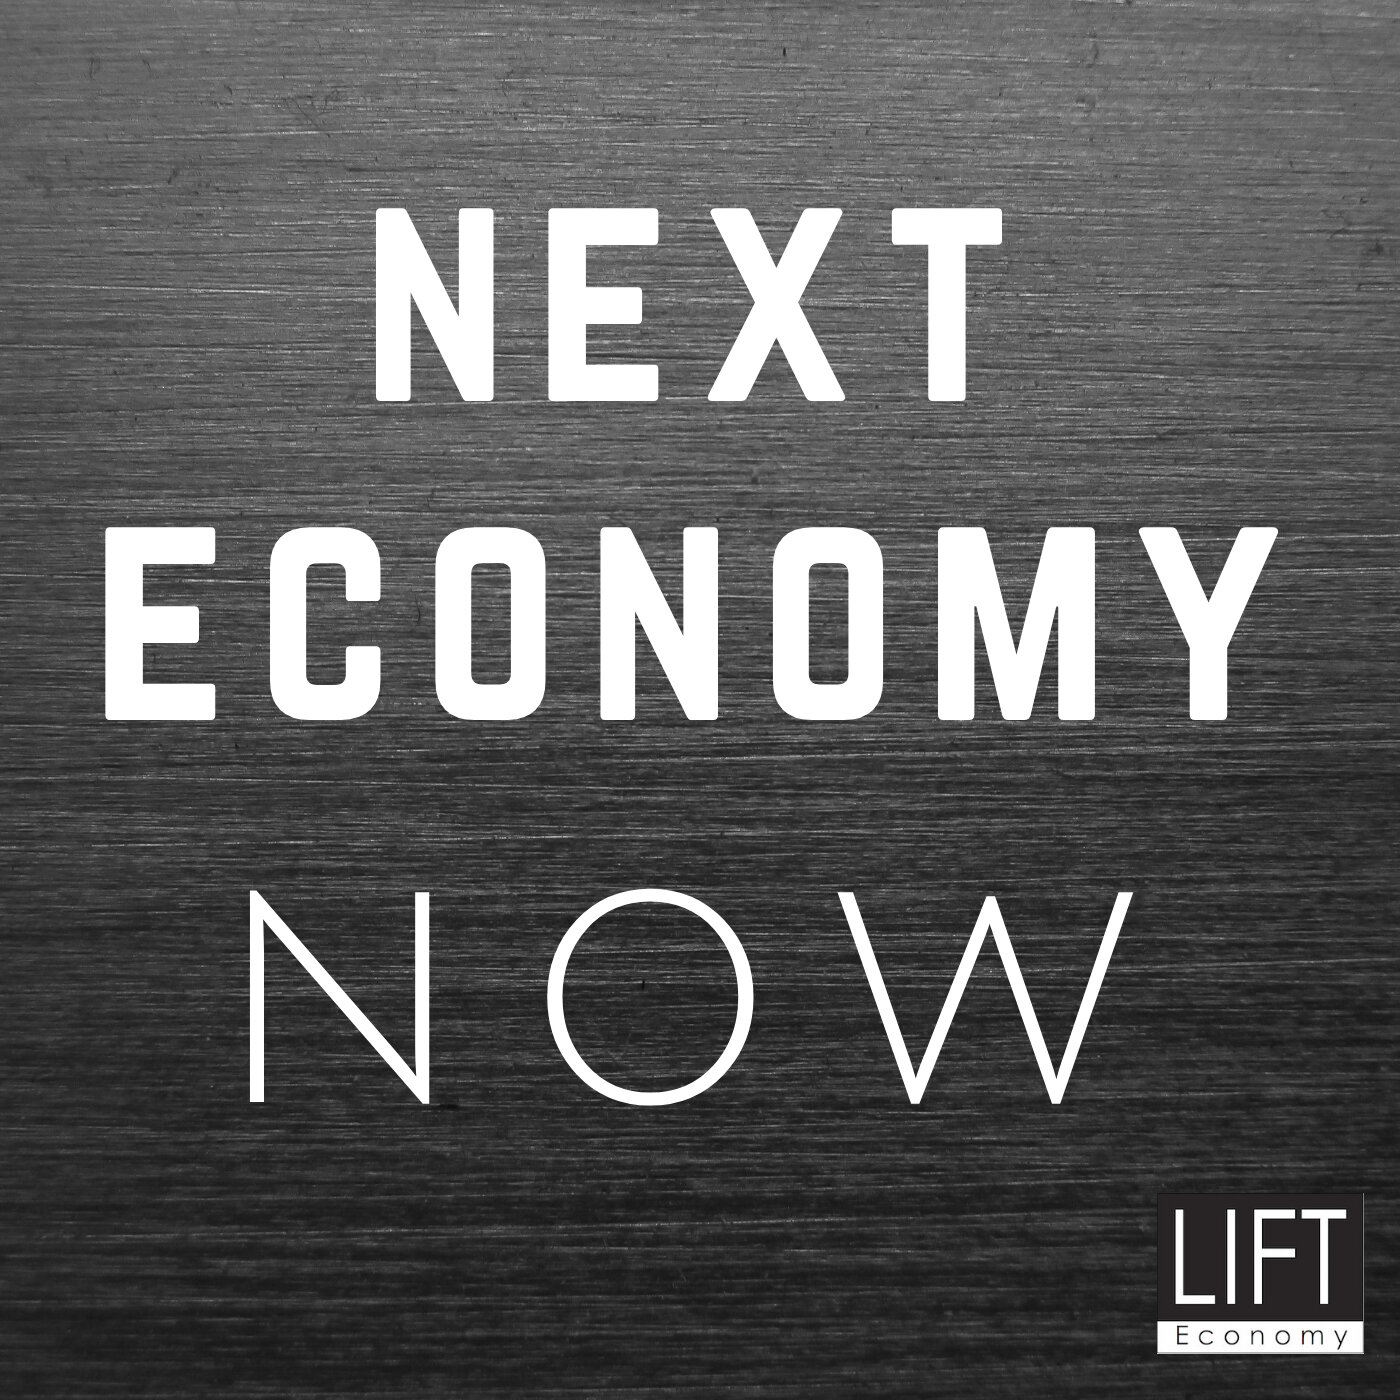 For Now. Economic is Now on. Y now